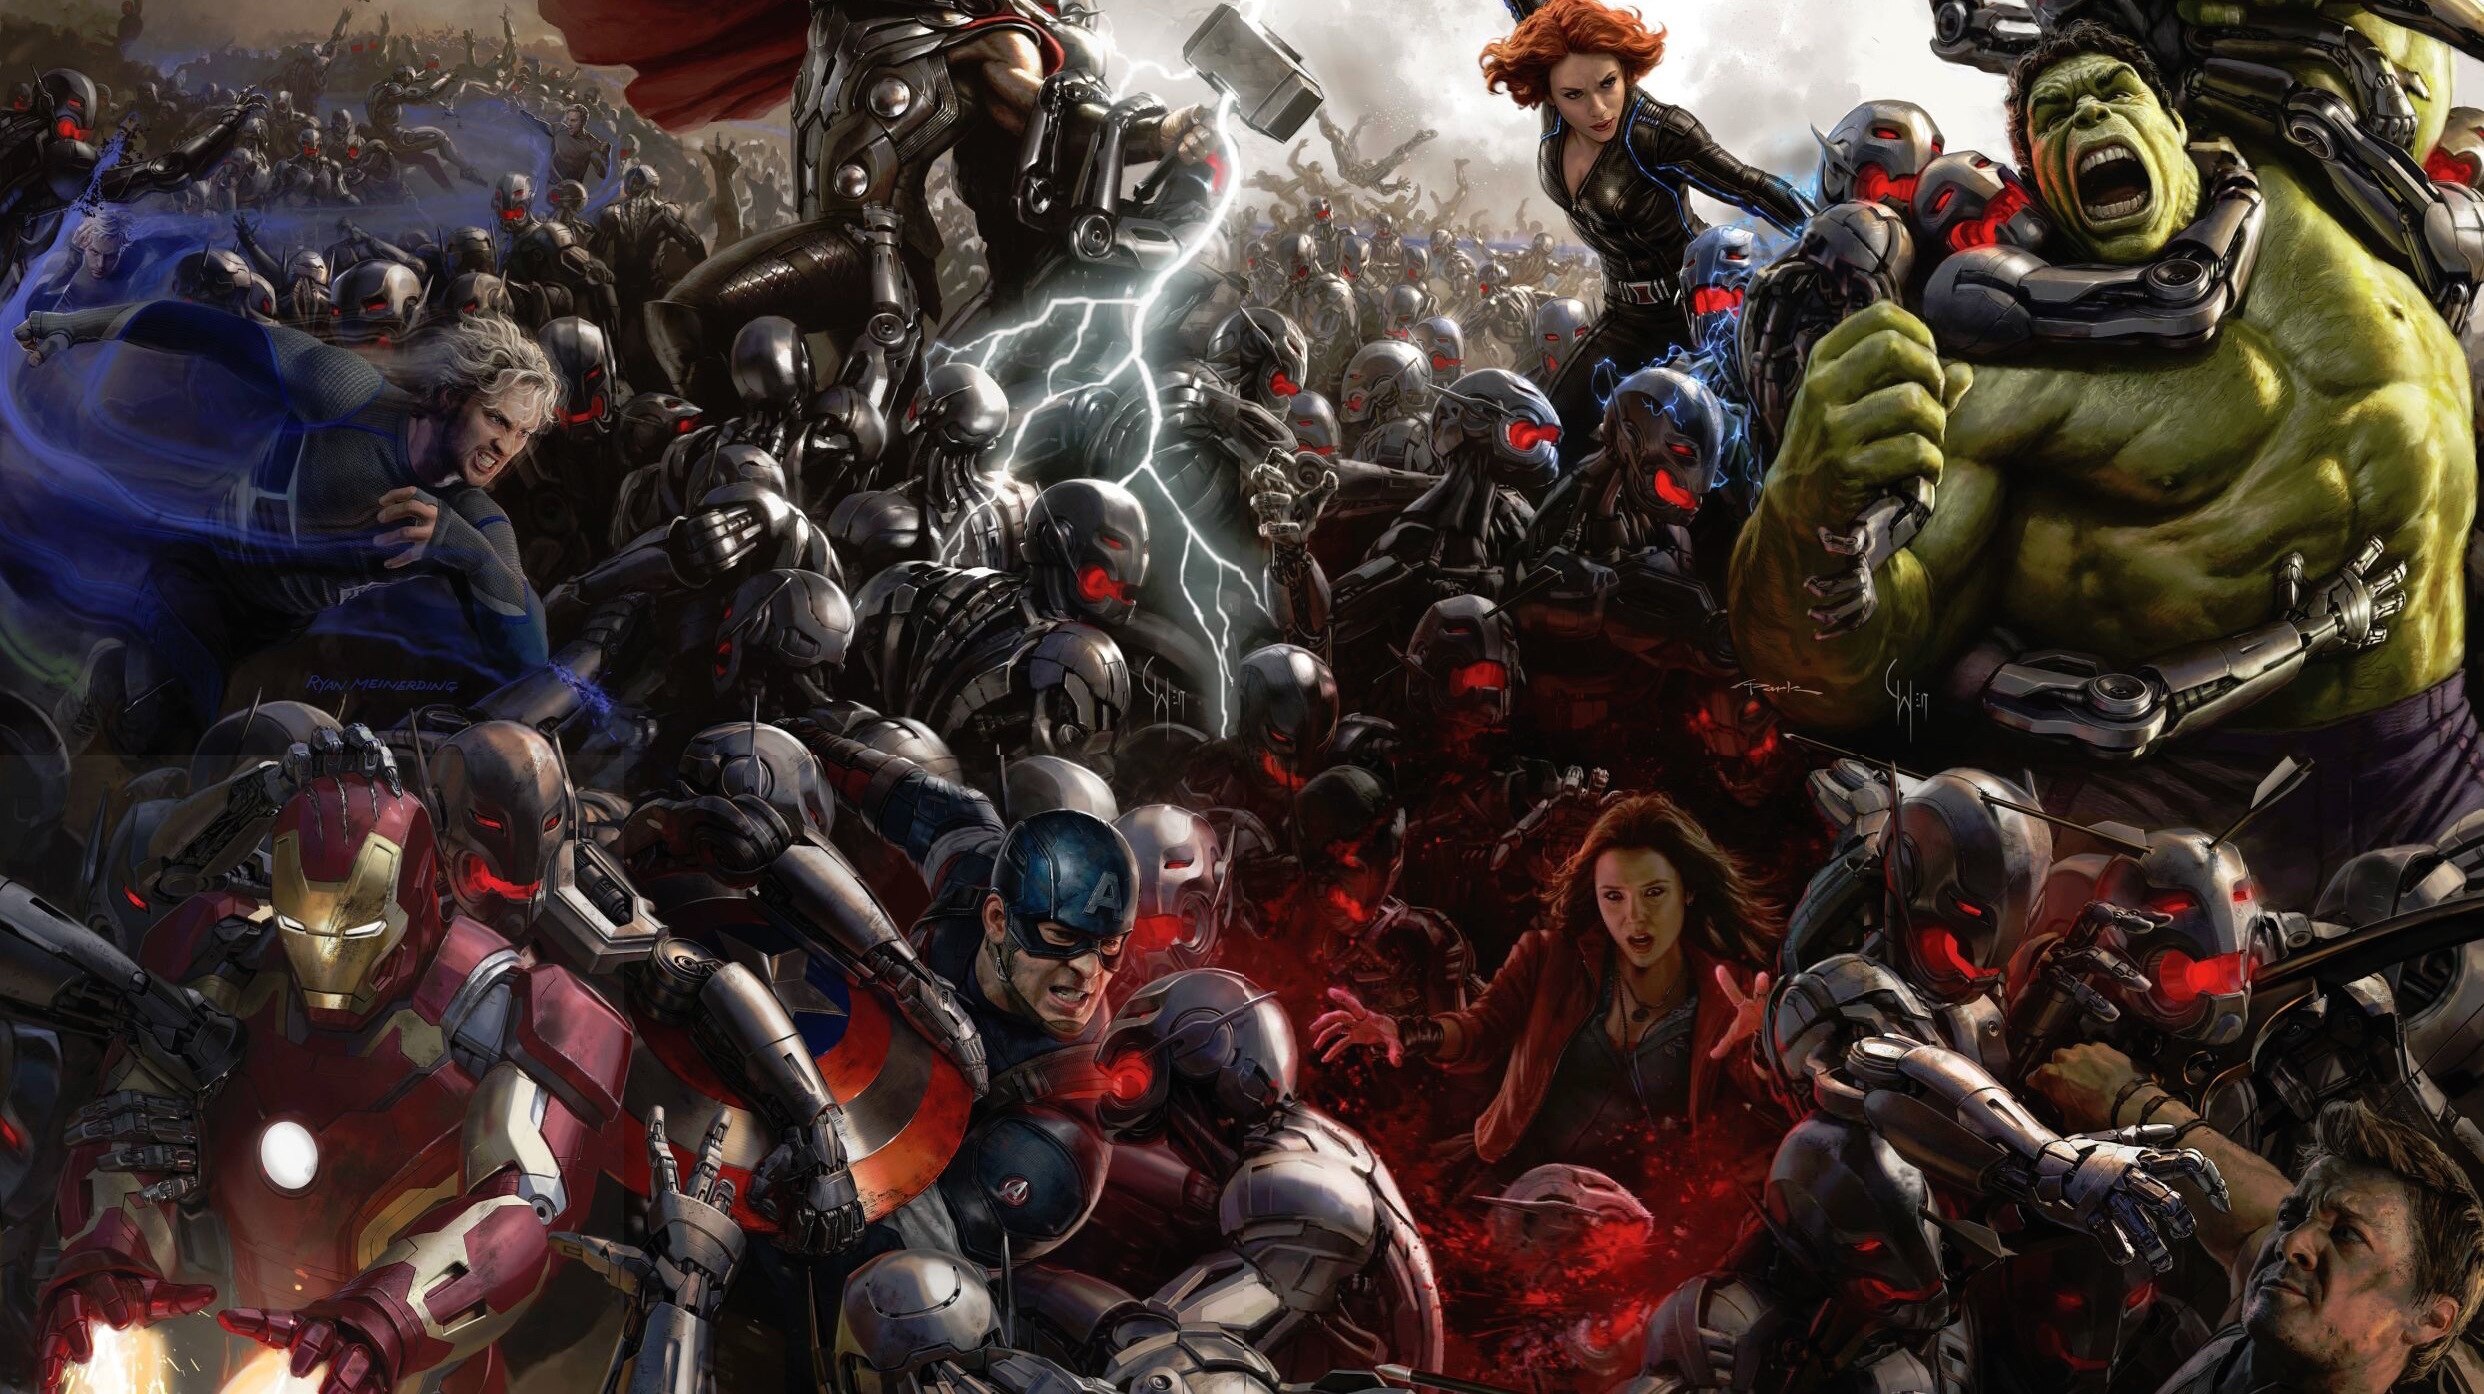 Scarlet Witch And Quicksilver Finally Get Their Own Avengers Age Of Ultron Posters